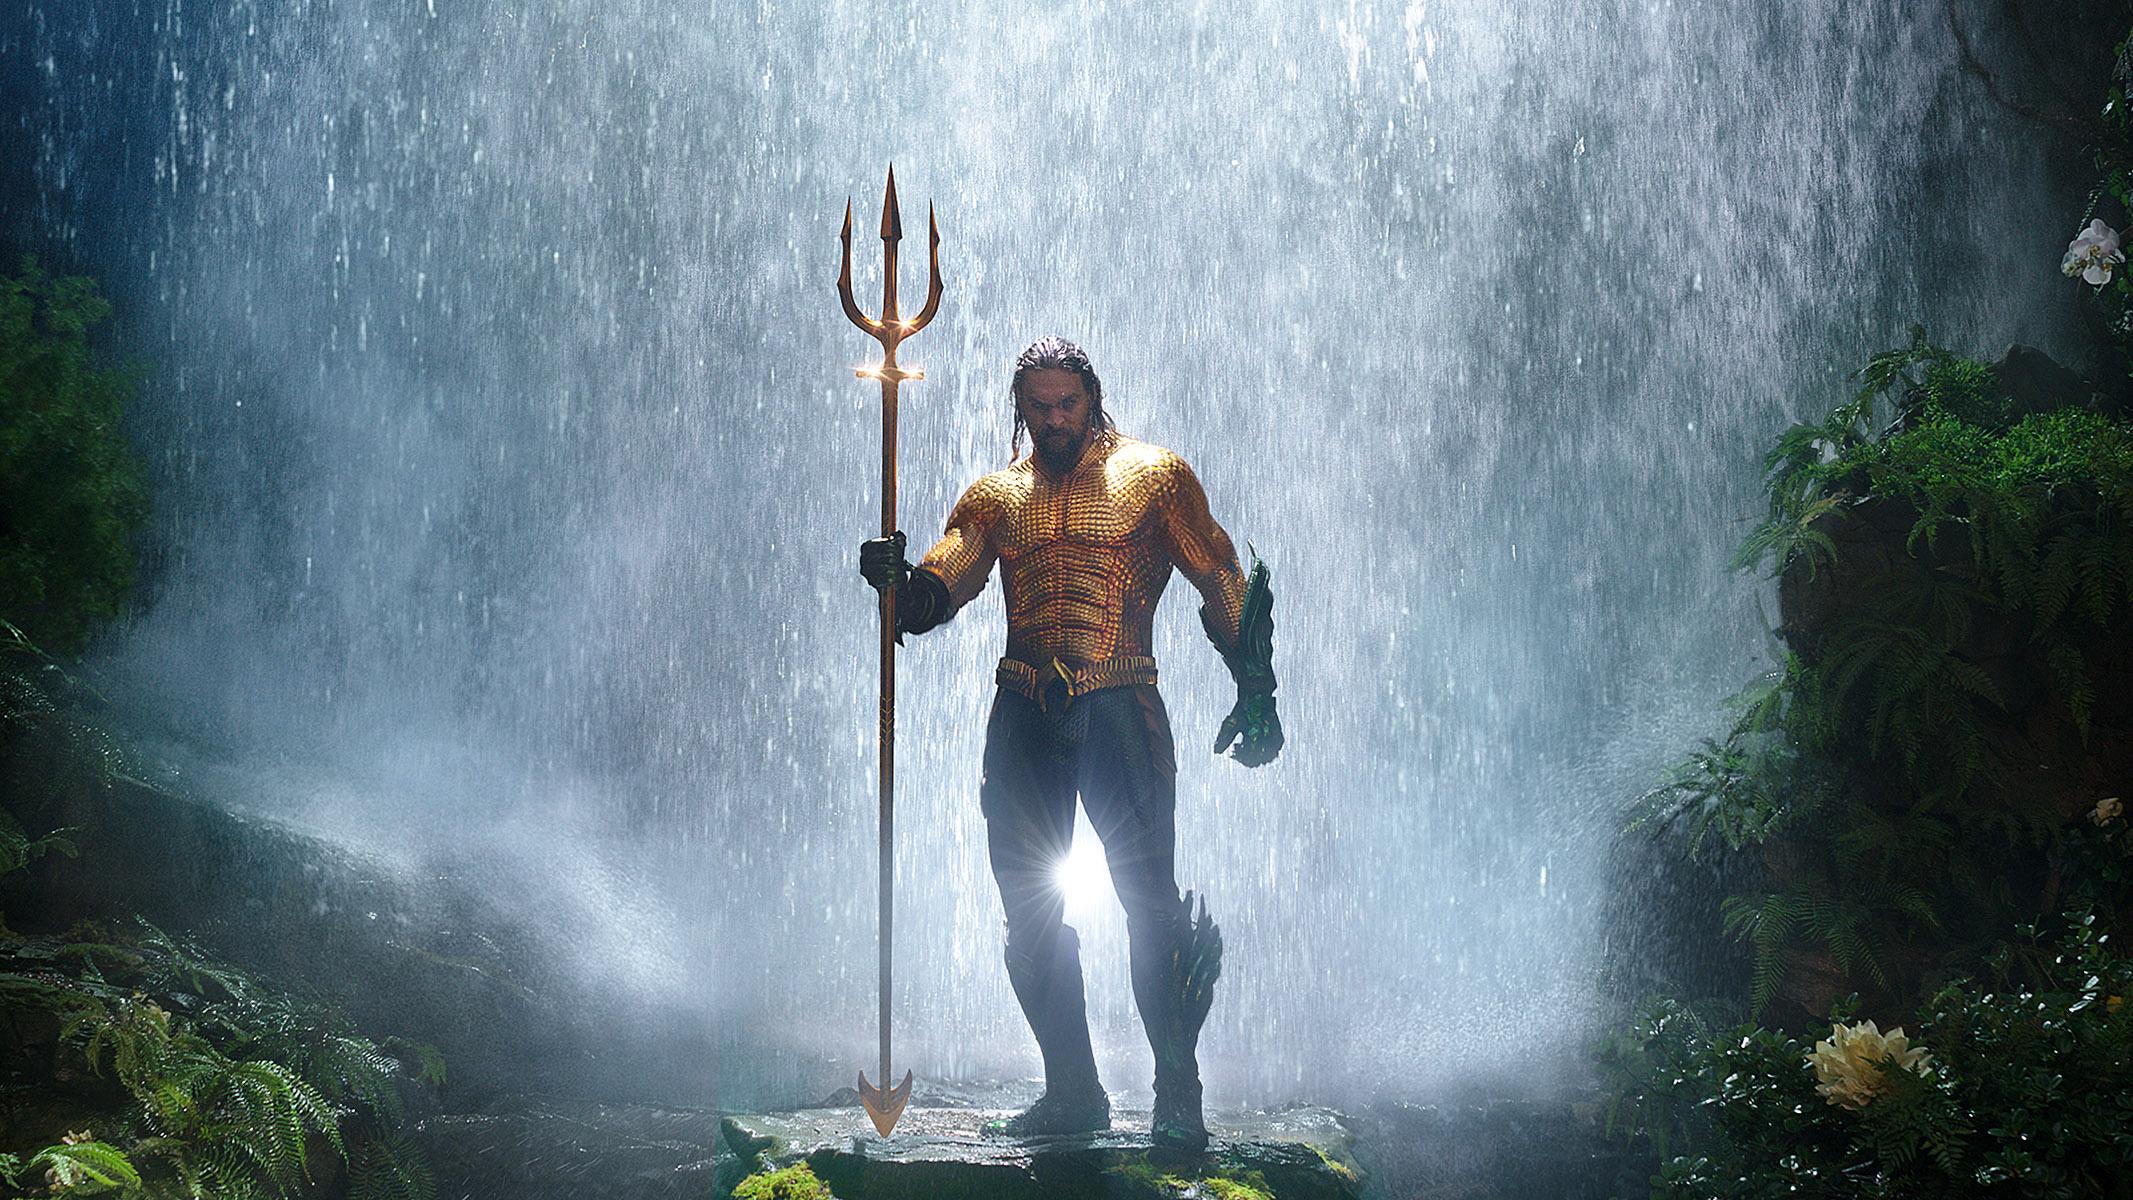 Jason Momoa as Aquaman holding a trident under a waterfall in DC's Aquaman.